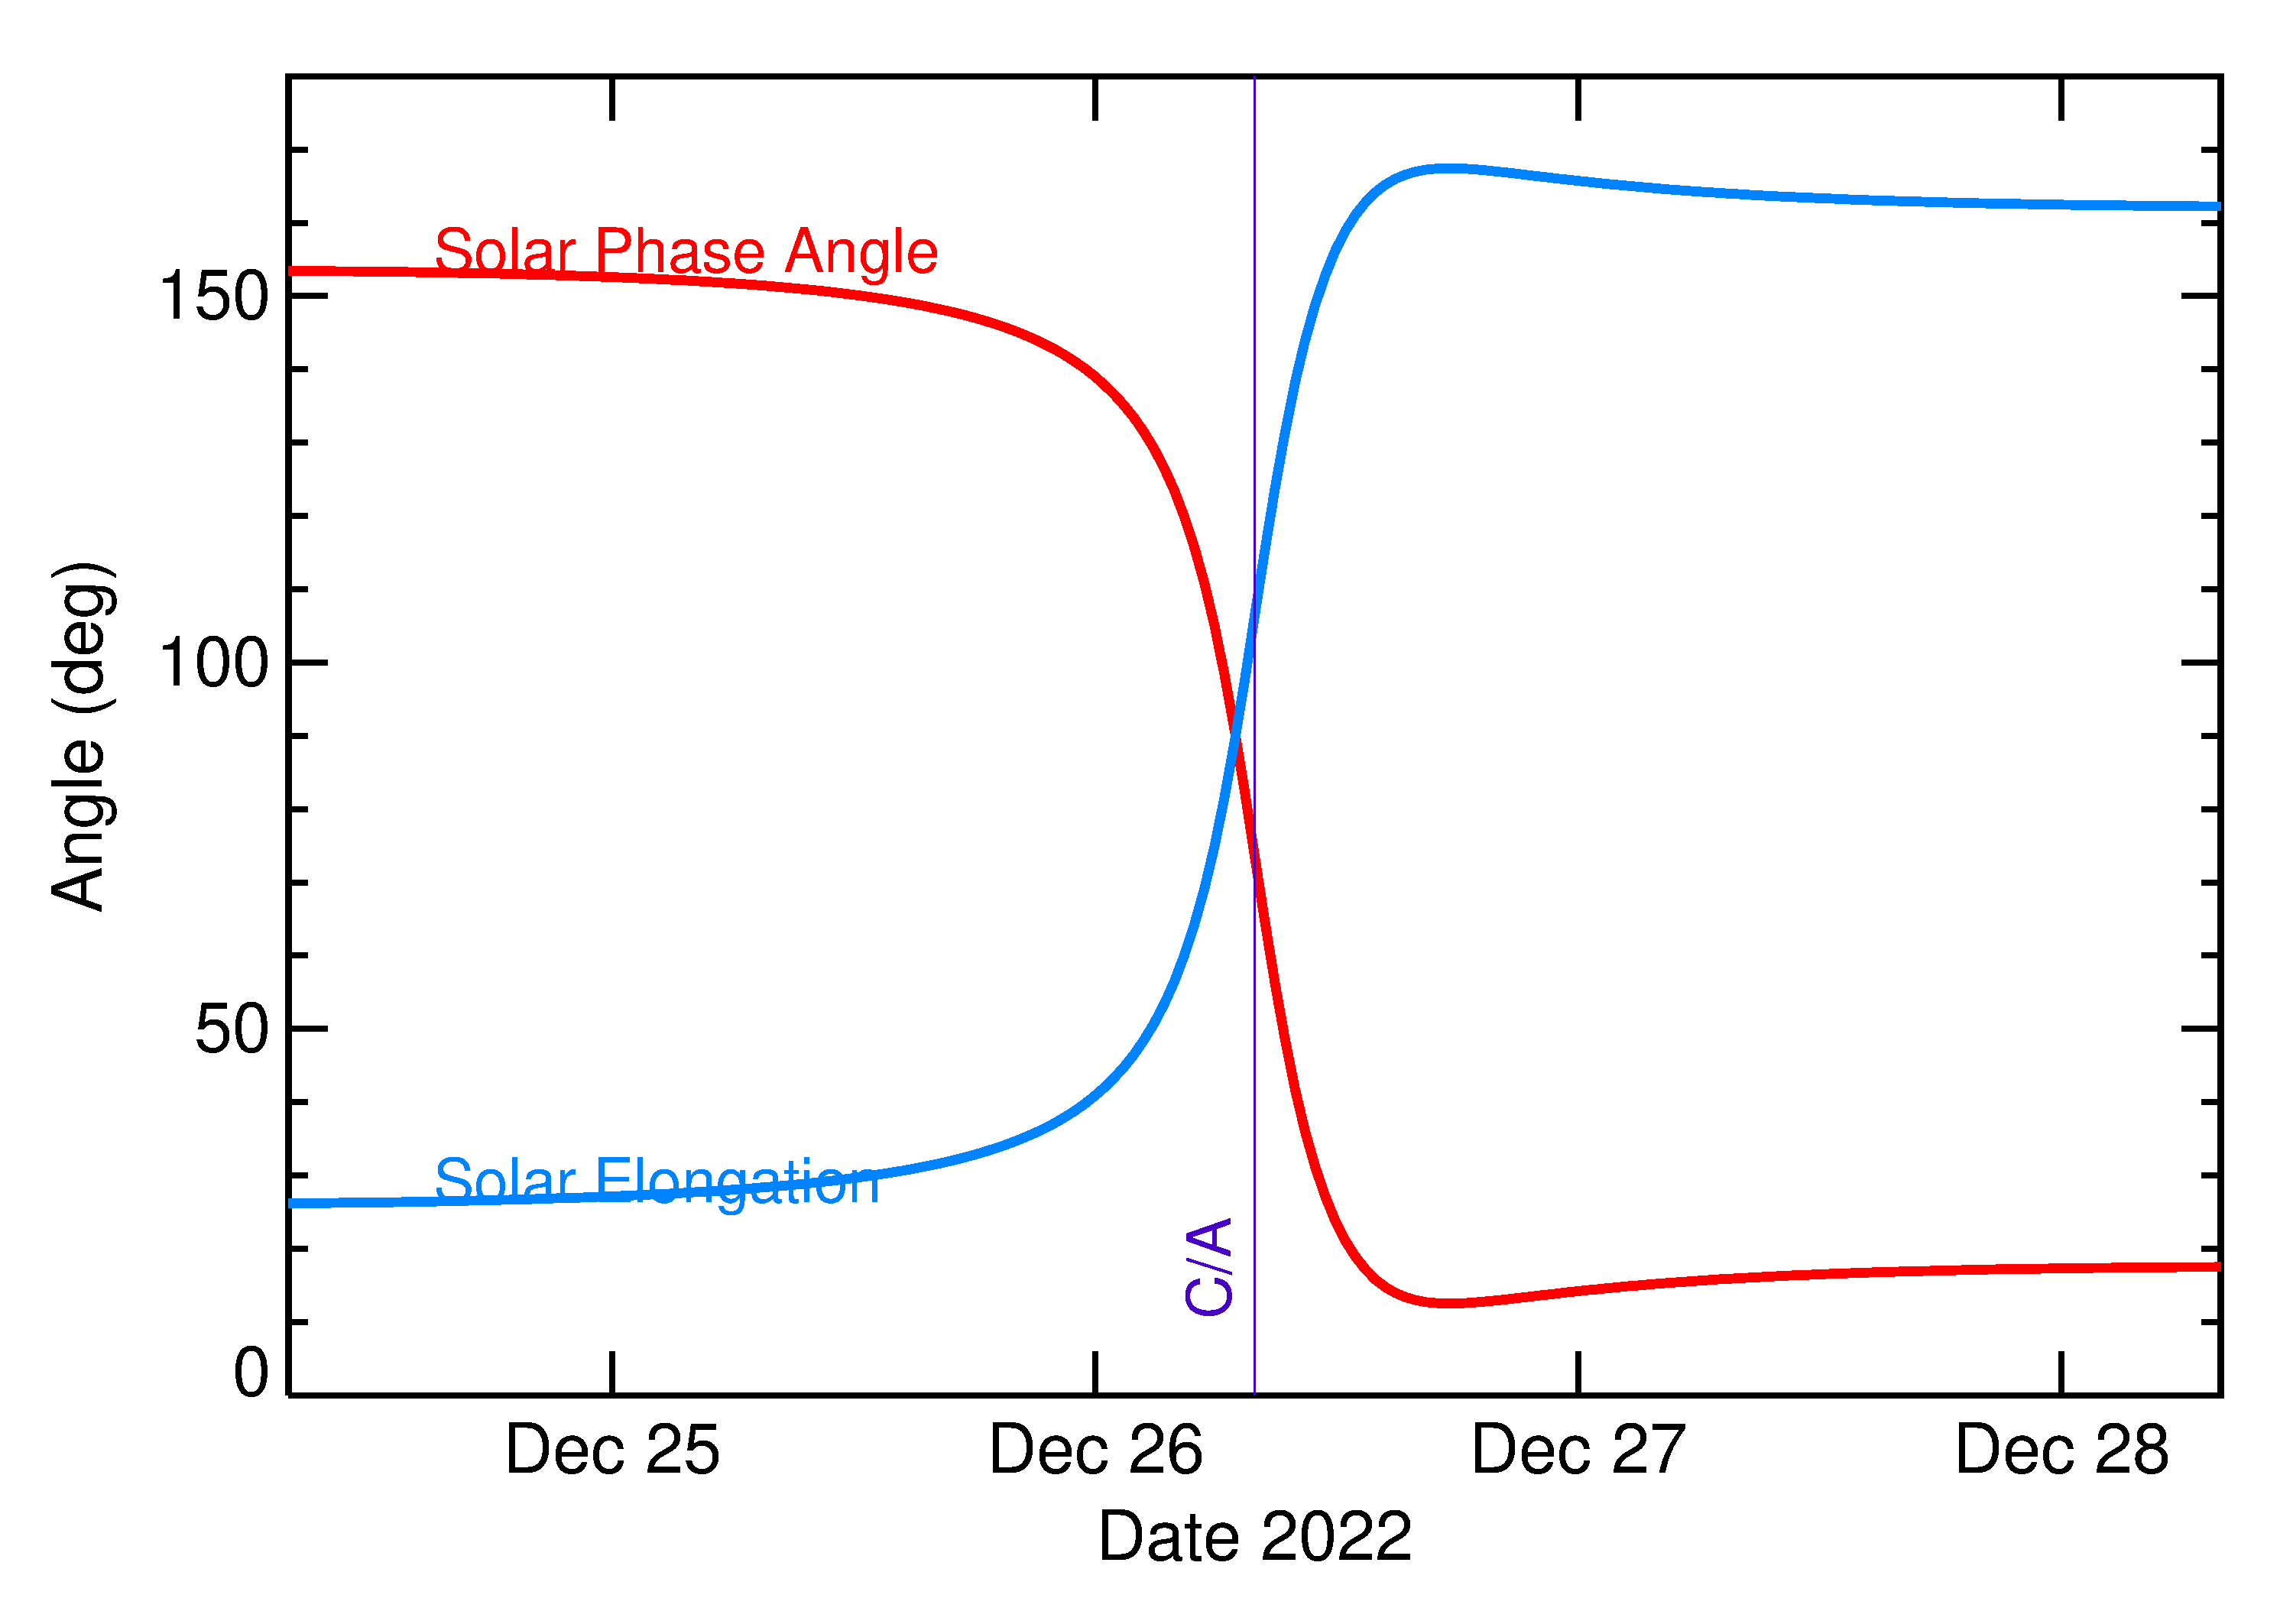 Solar Elongation and Solar Phase Angle of 2022 YA6 in the days around closest approach